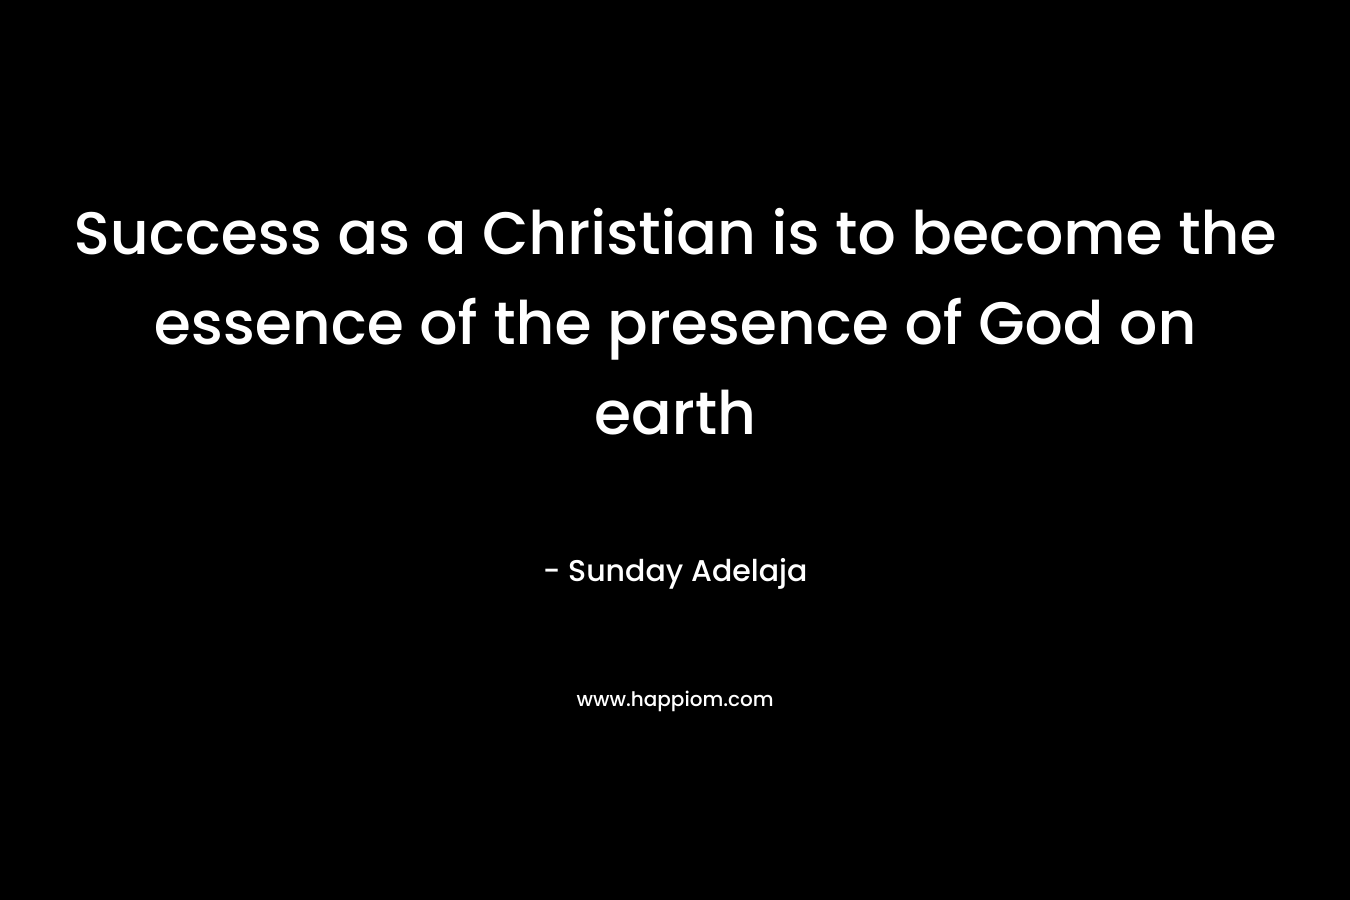 Success as a Christian is to become the essence of the presence of God on earth